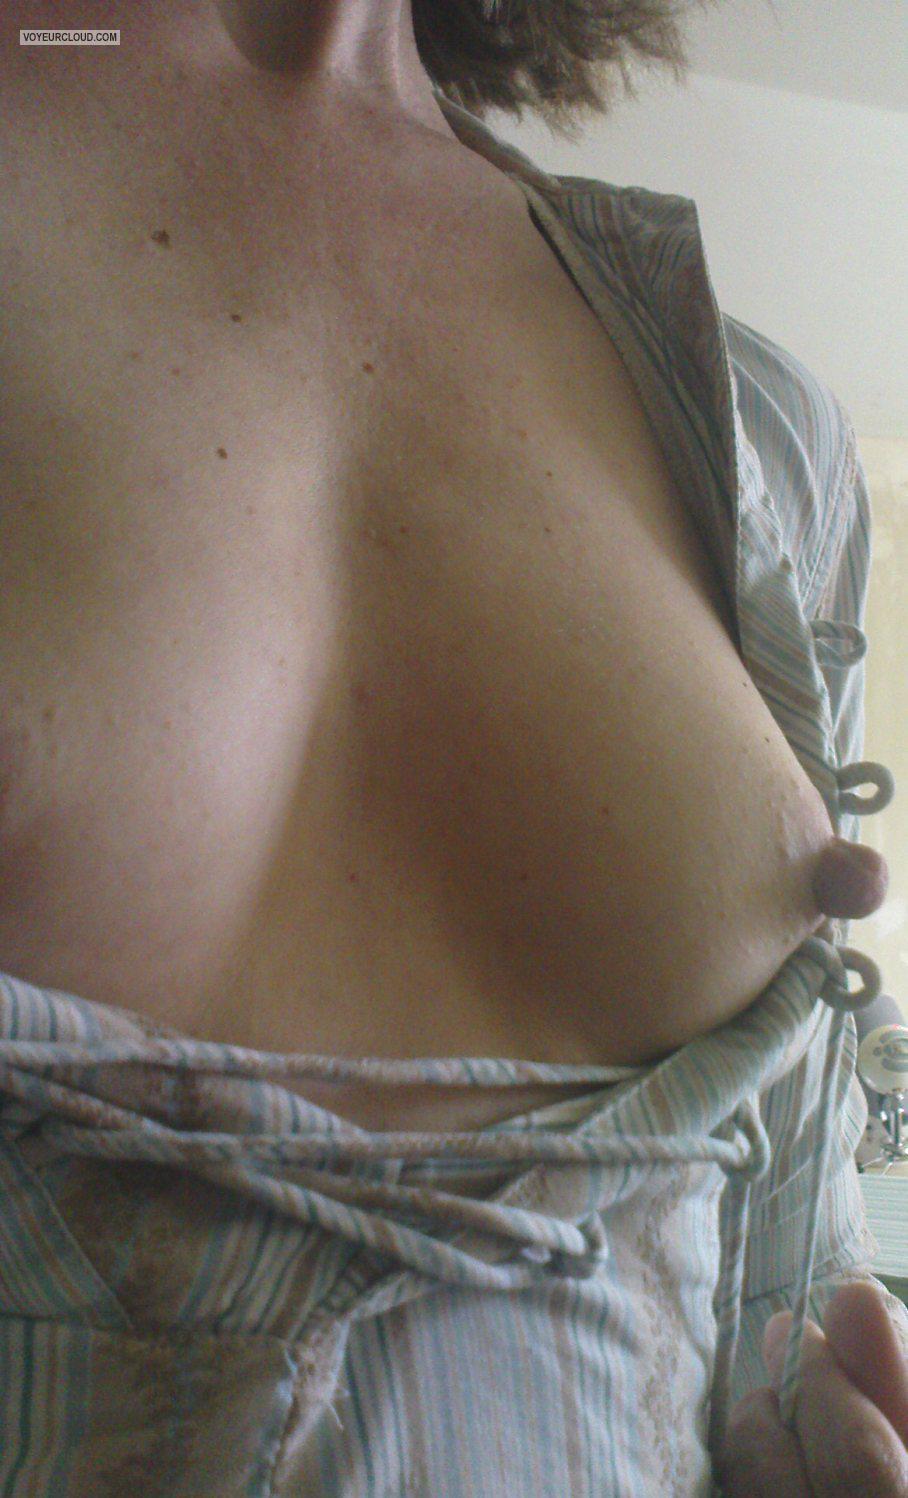 My Small Tits Selfie by Permanently Erect Nipples